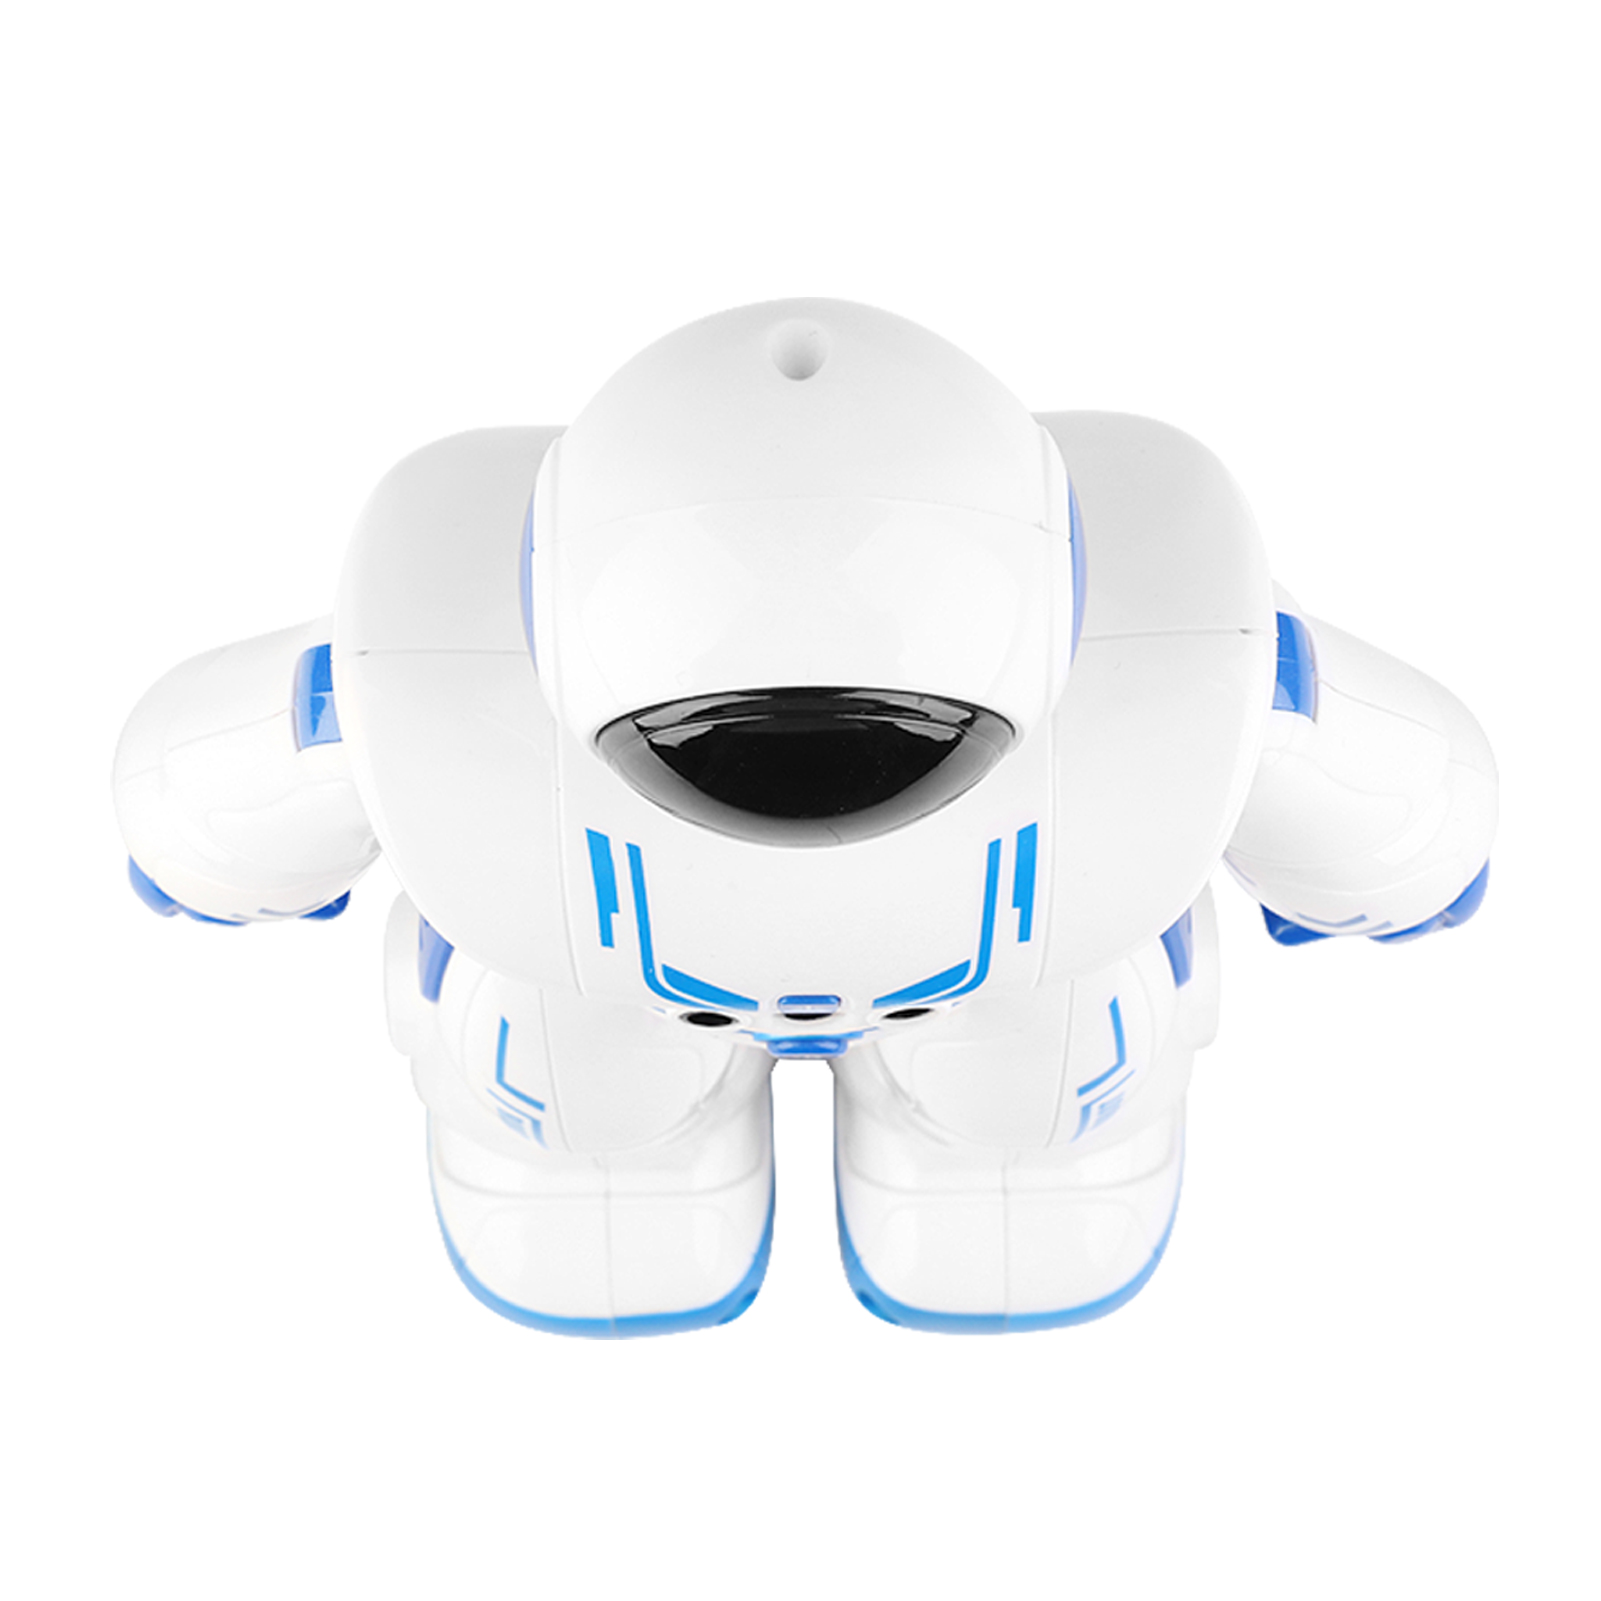 Dcenta Smart Intelligent Robot Toy (Blue and White) - image 2 of 7